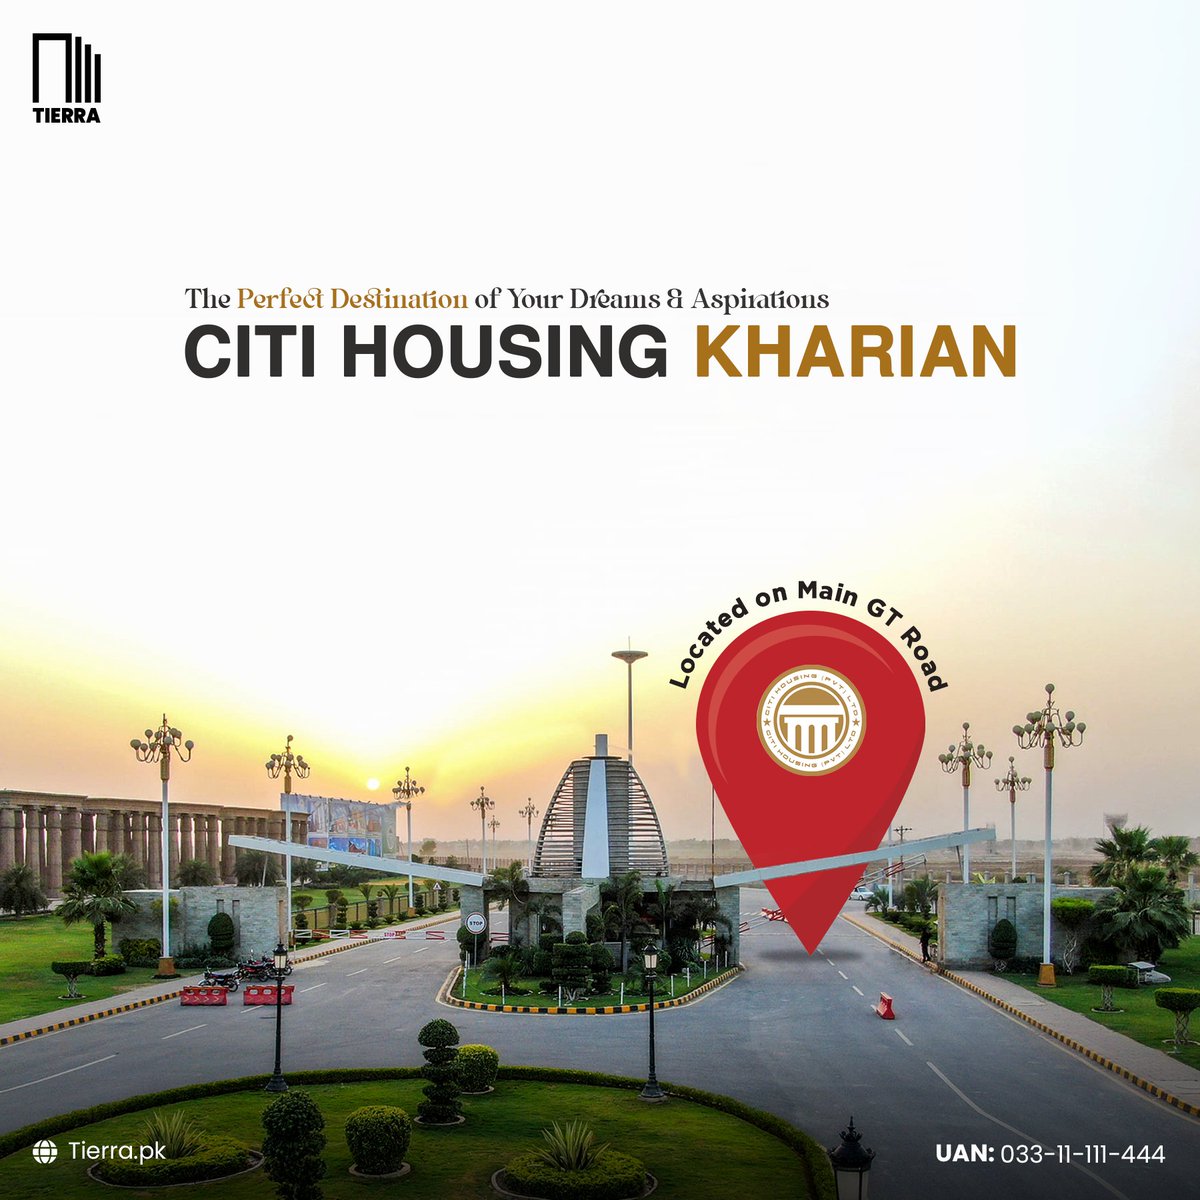 CITI Housing Kharian: Where Luxury Living Meets Limitless Opportunities. Whether you seek a sound investment or your dream home, CITI Housing Kharian offers it all. Secure your dream address with Tierra Associates & make a savvy investment.

#CitiHousingkharian #TierraAssociates